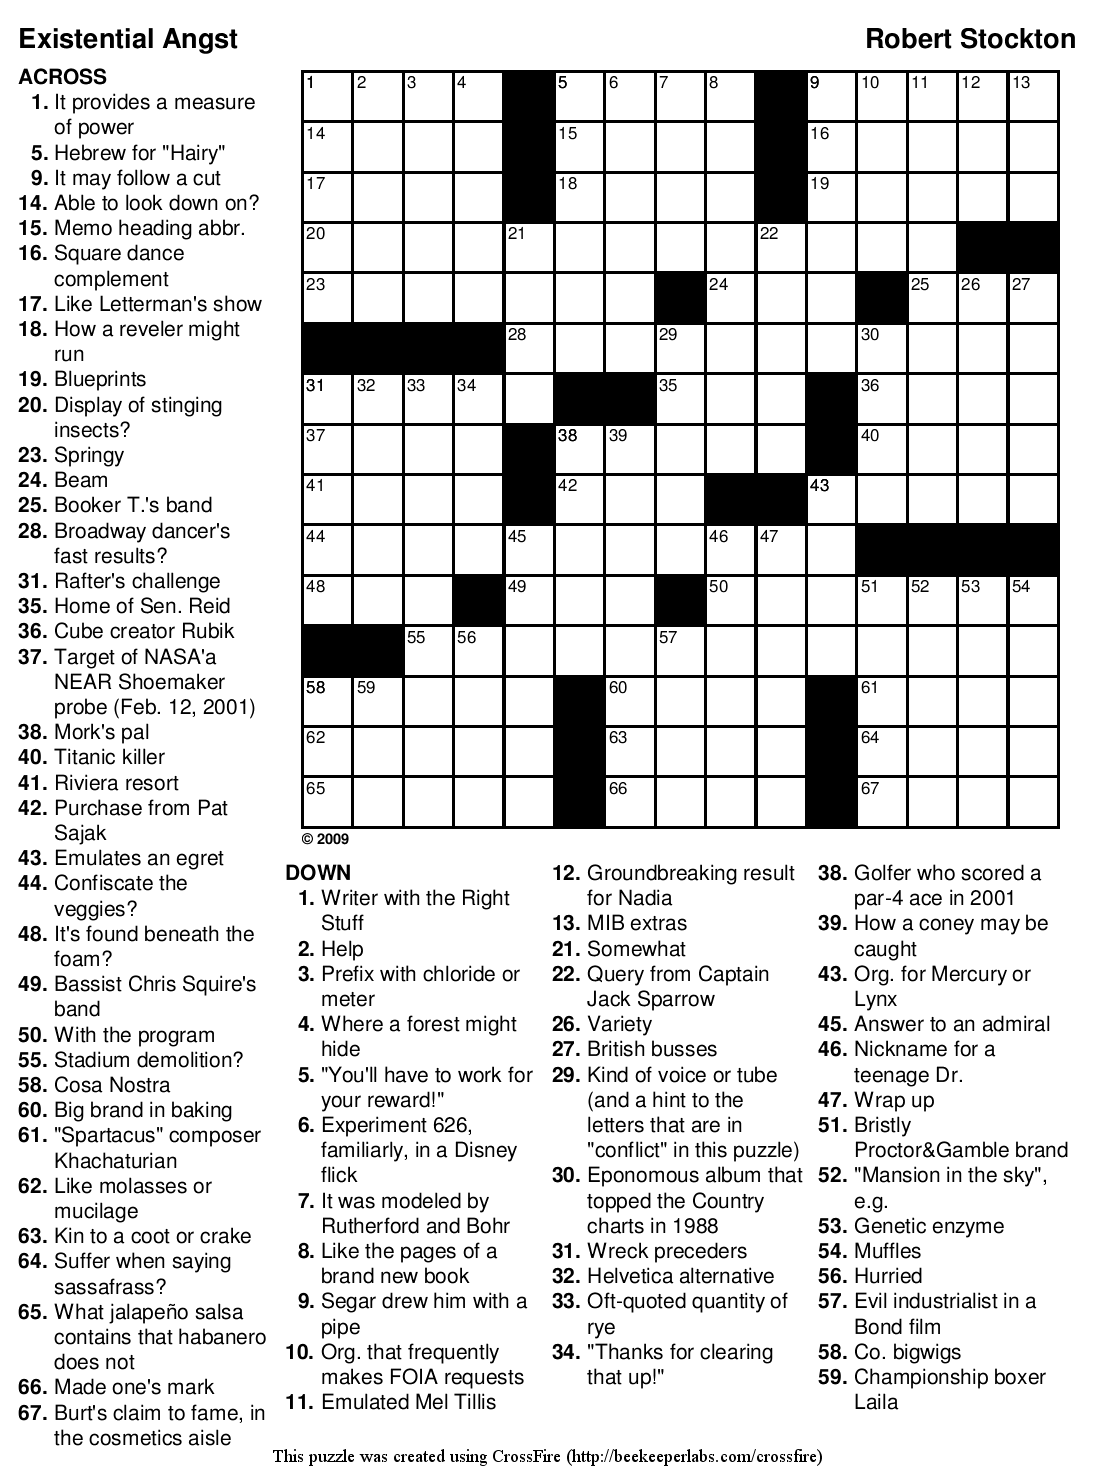 8 Best Images of Hard Printable Crossword Puzzles For ...